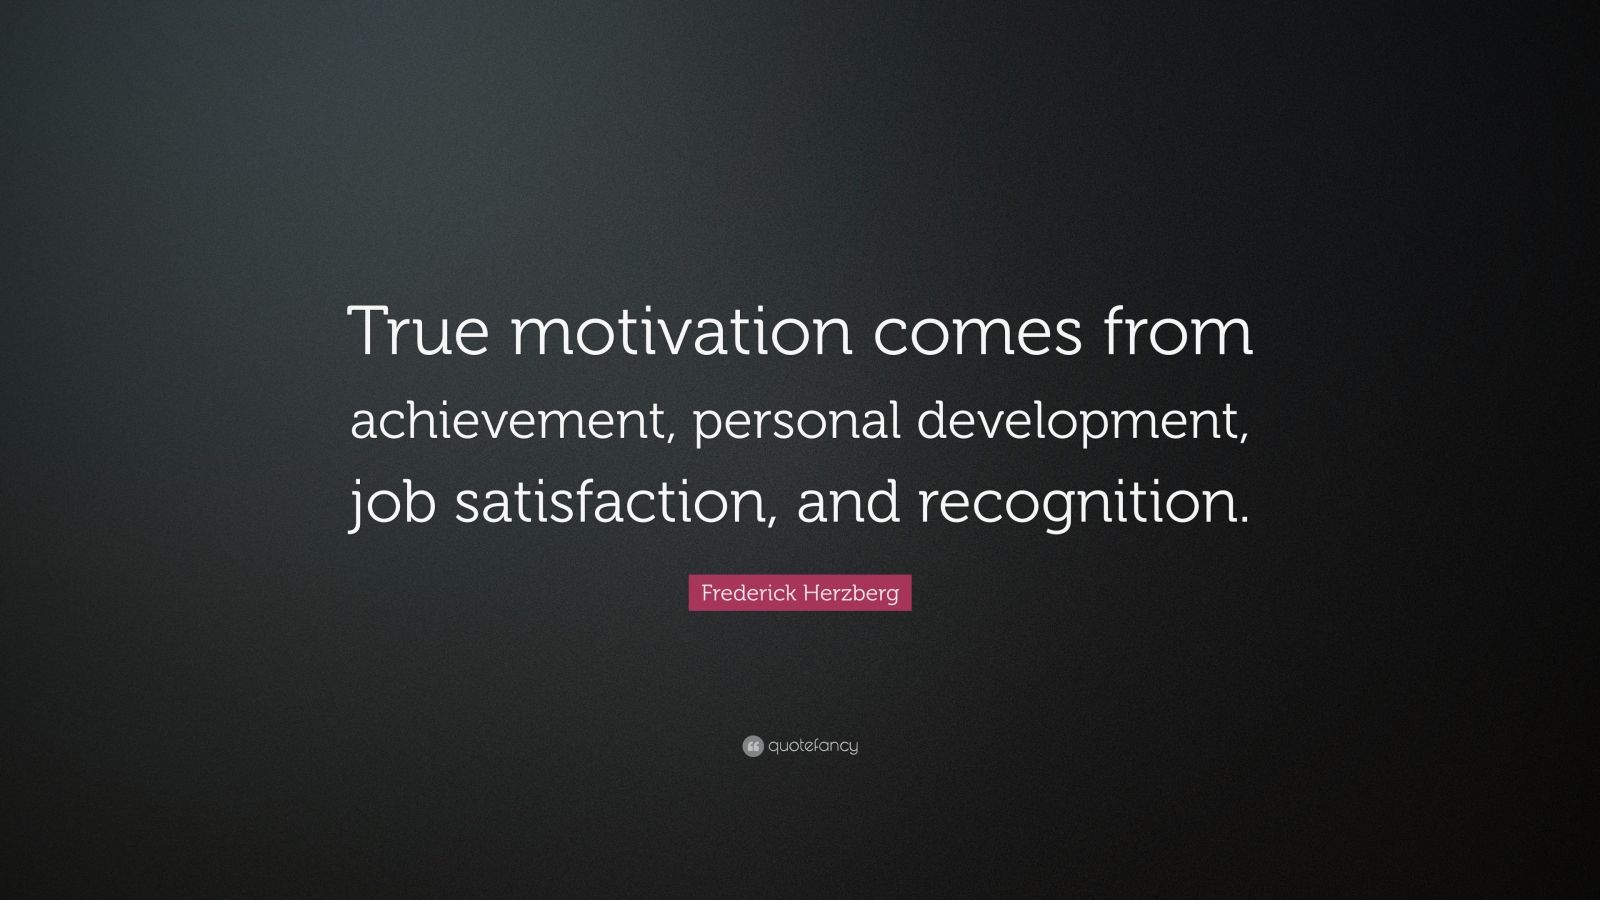 What Makes A True Motivation Comes From